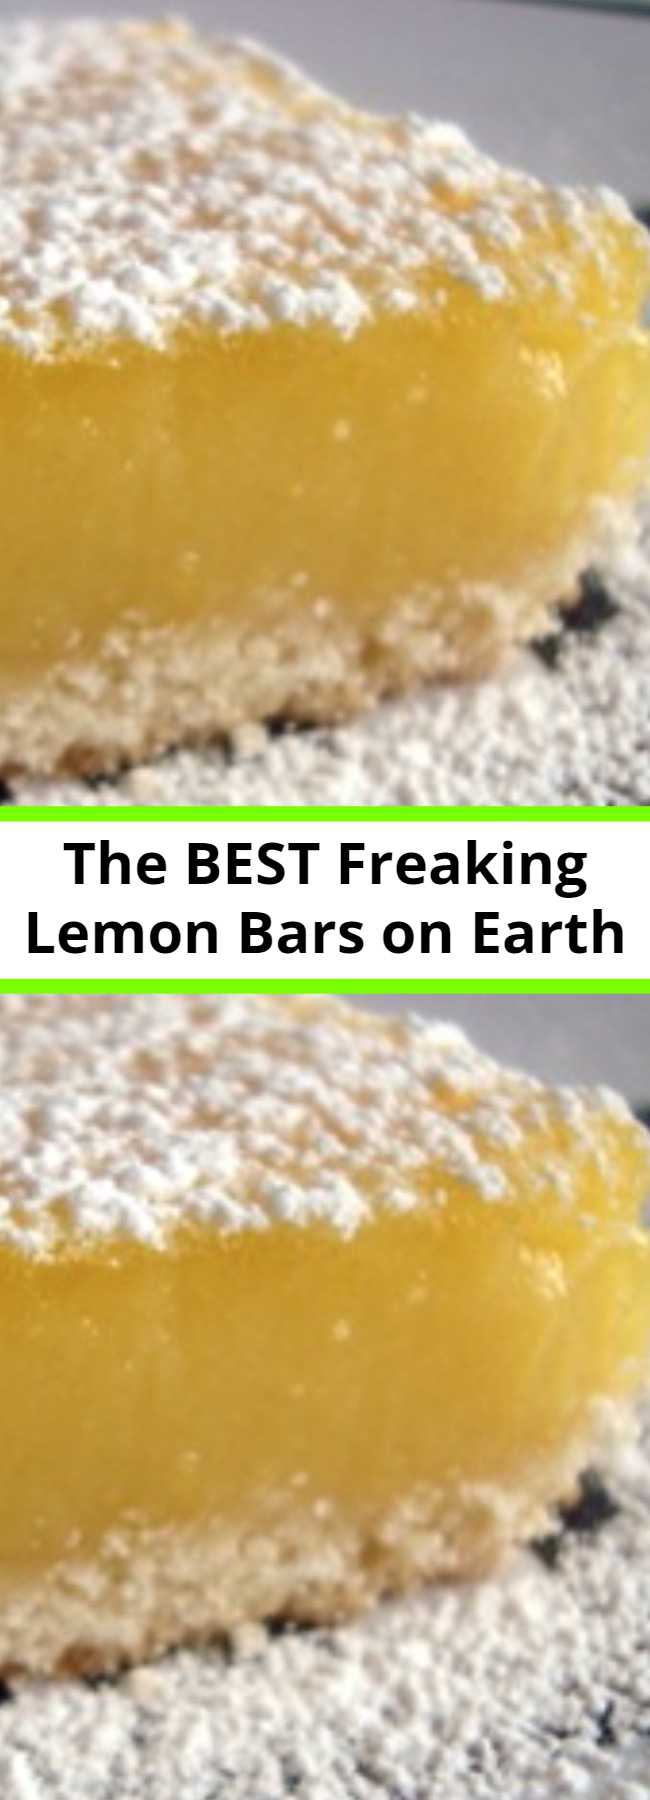 The BEST Freaking Lemon Bars on Earth - You think I’m kidding? You will never, ever, buy the ready-to-make box of pseudo-lemon bars again. This one is the be all and end all. This one is The BEST Freaking Lemon Bars on Earth!